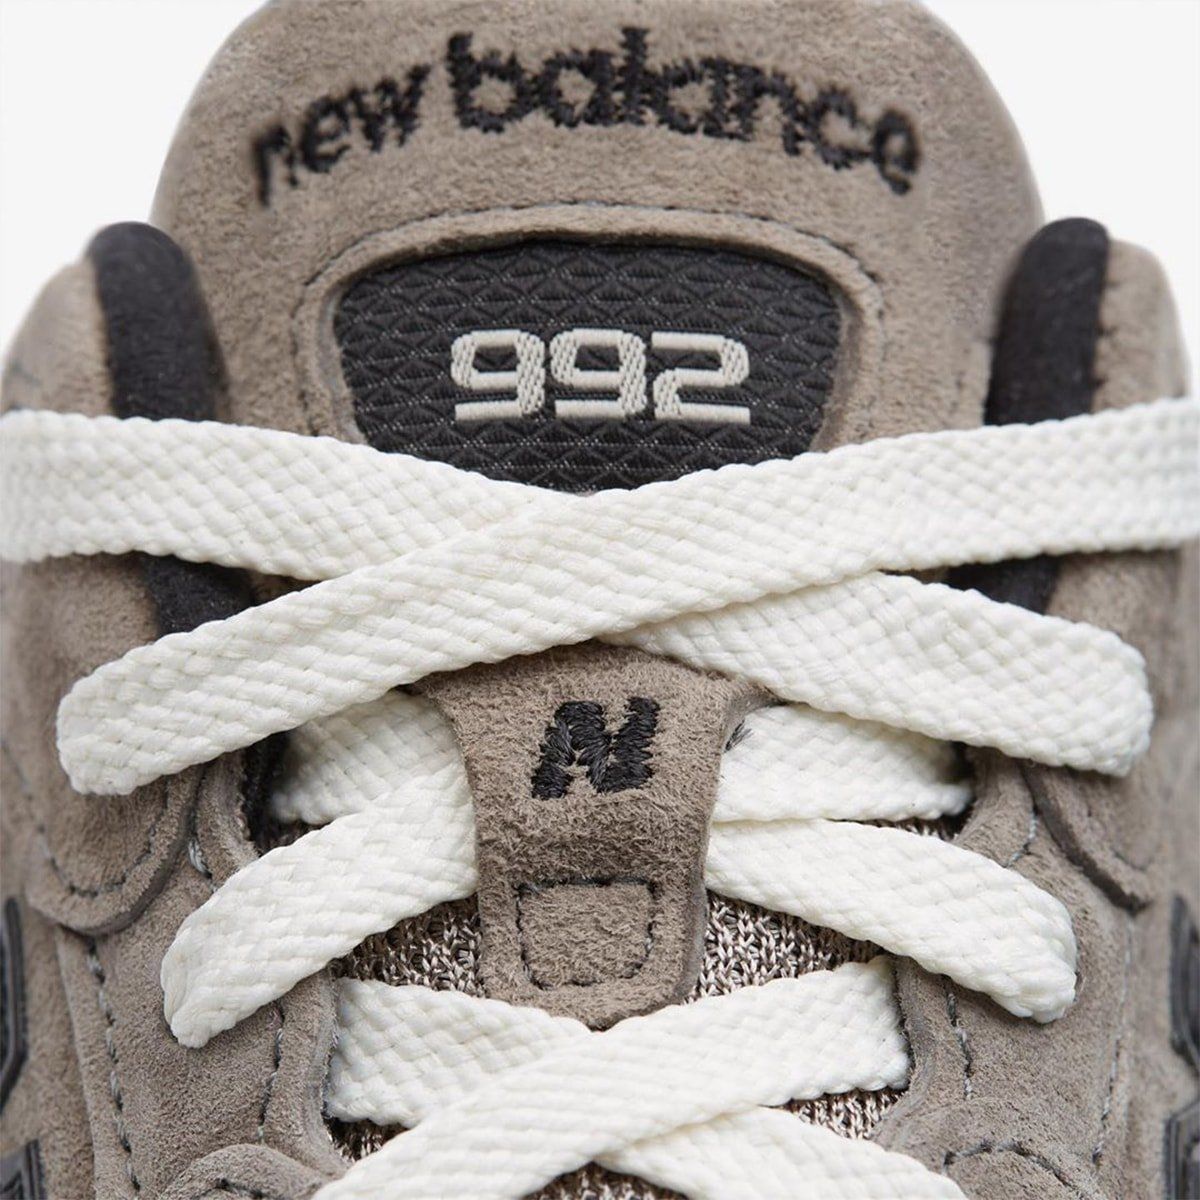 JJJJound x New Balance 992 Capsule Releases on August 20th in 